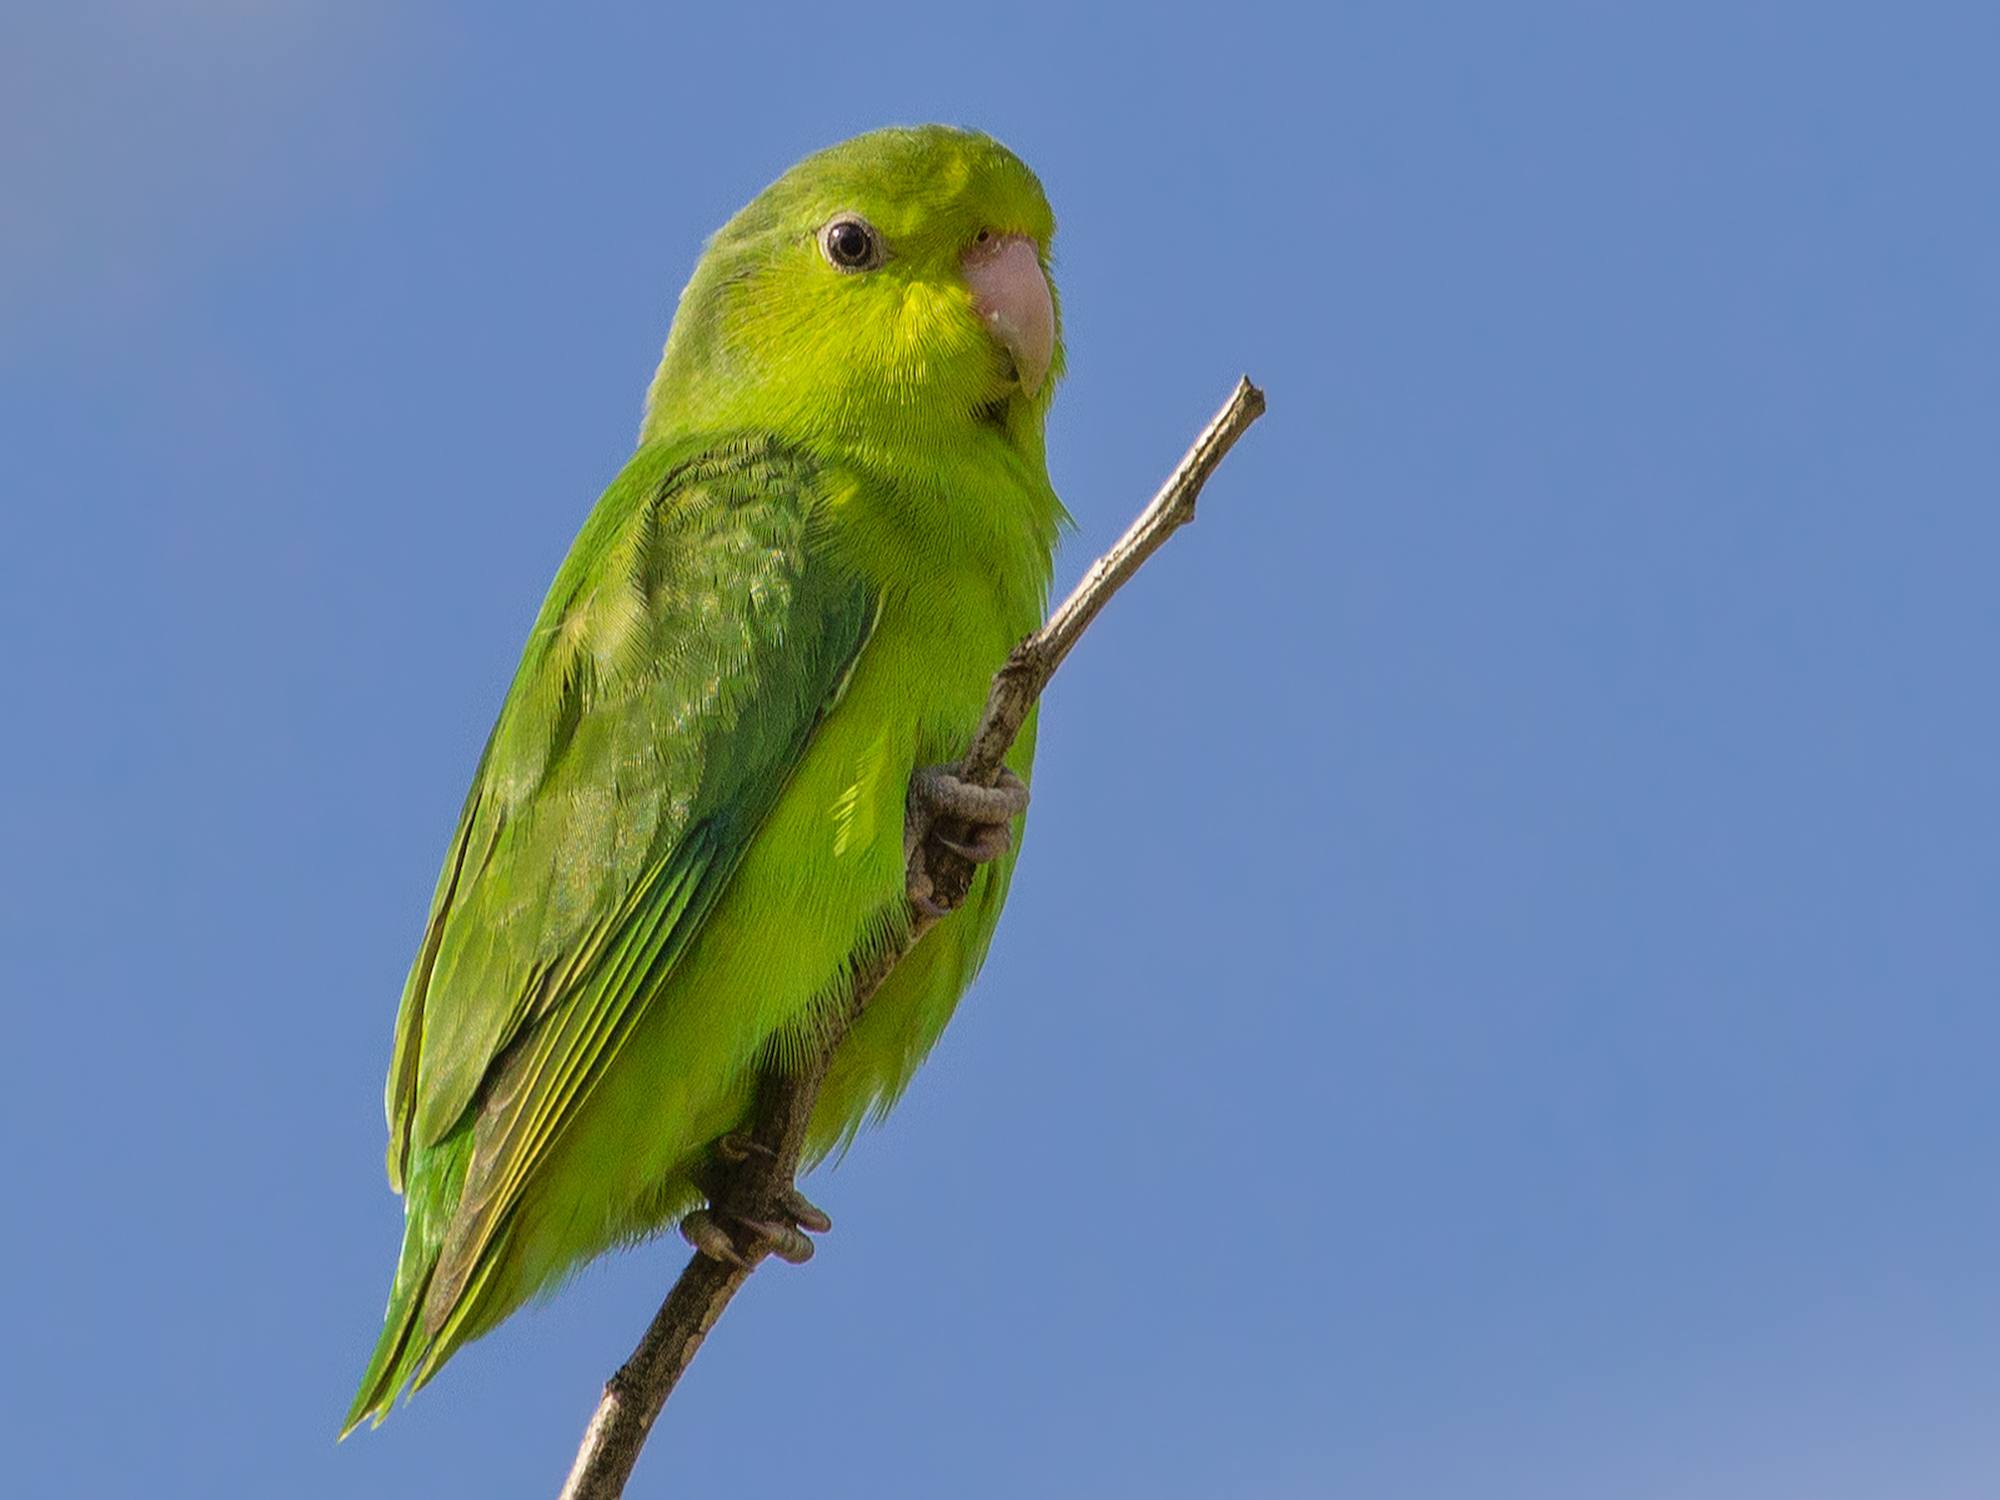 Green parrotlet standing on a branch near the tip